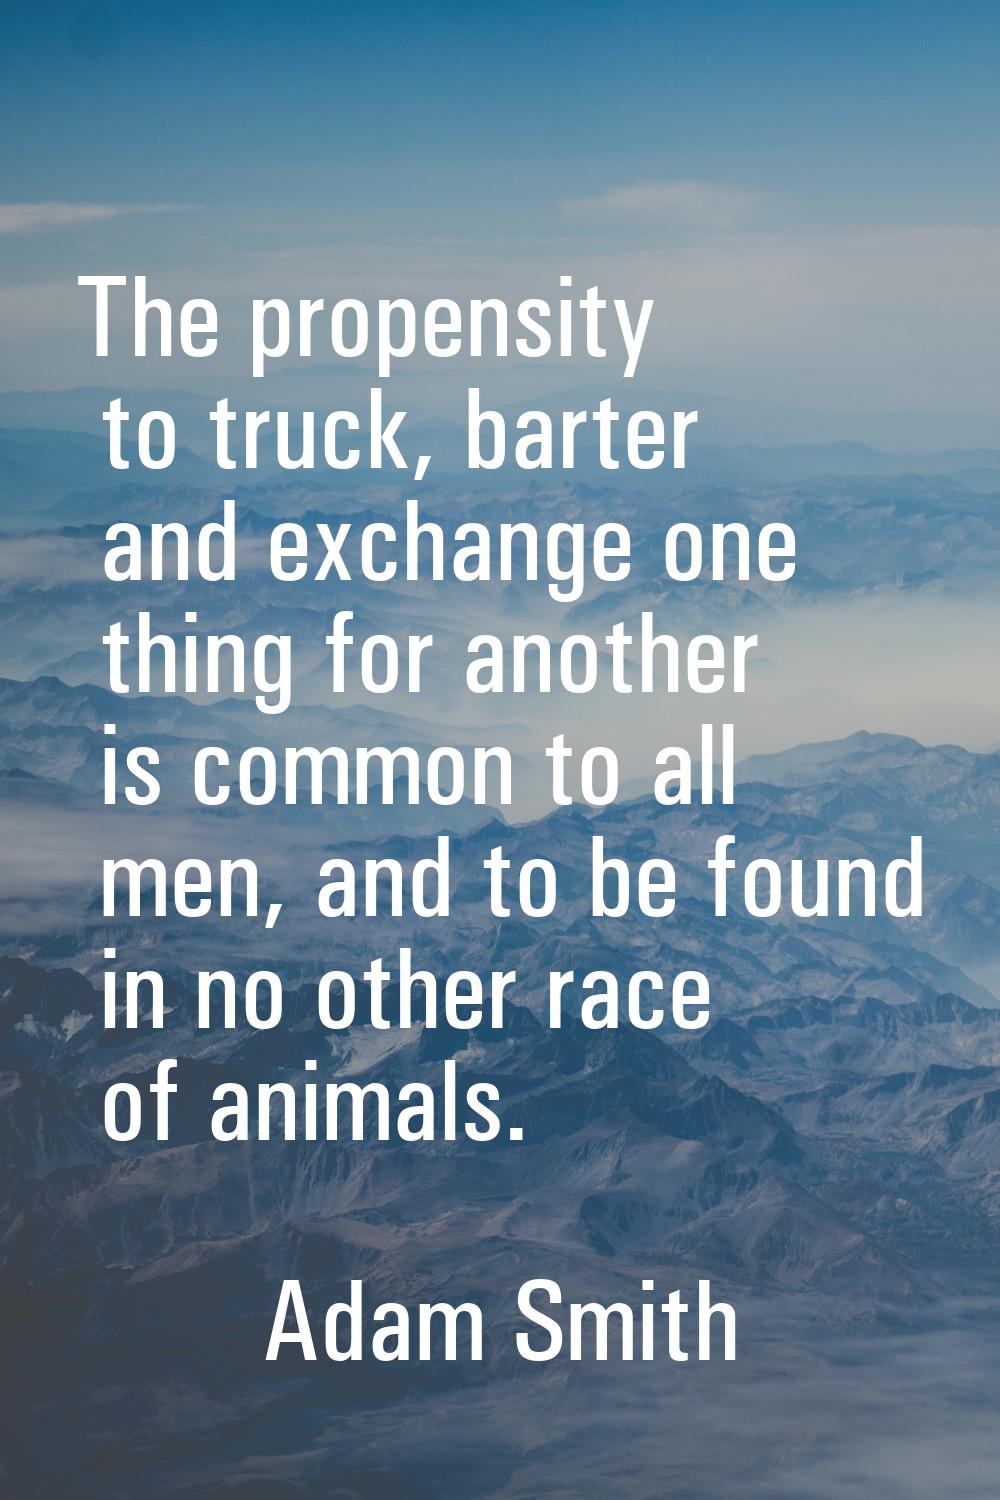 The propensity to truck, barter and exchange one thing for another is common to all men, and to be 